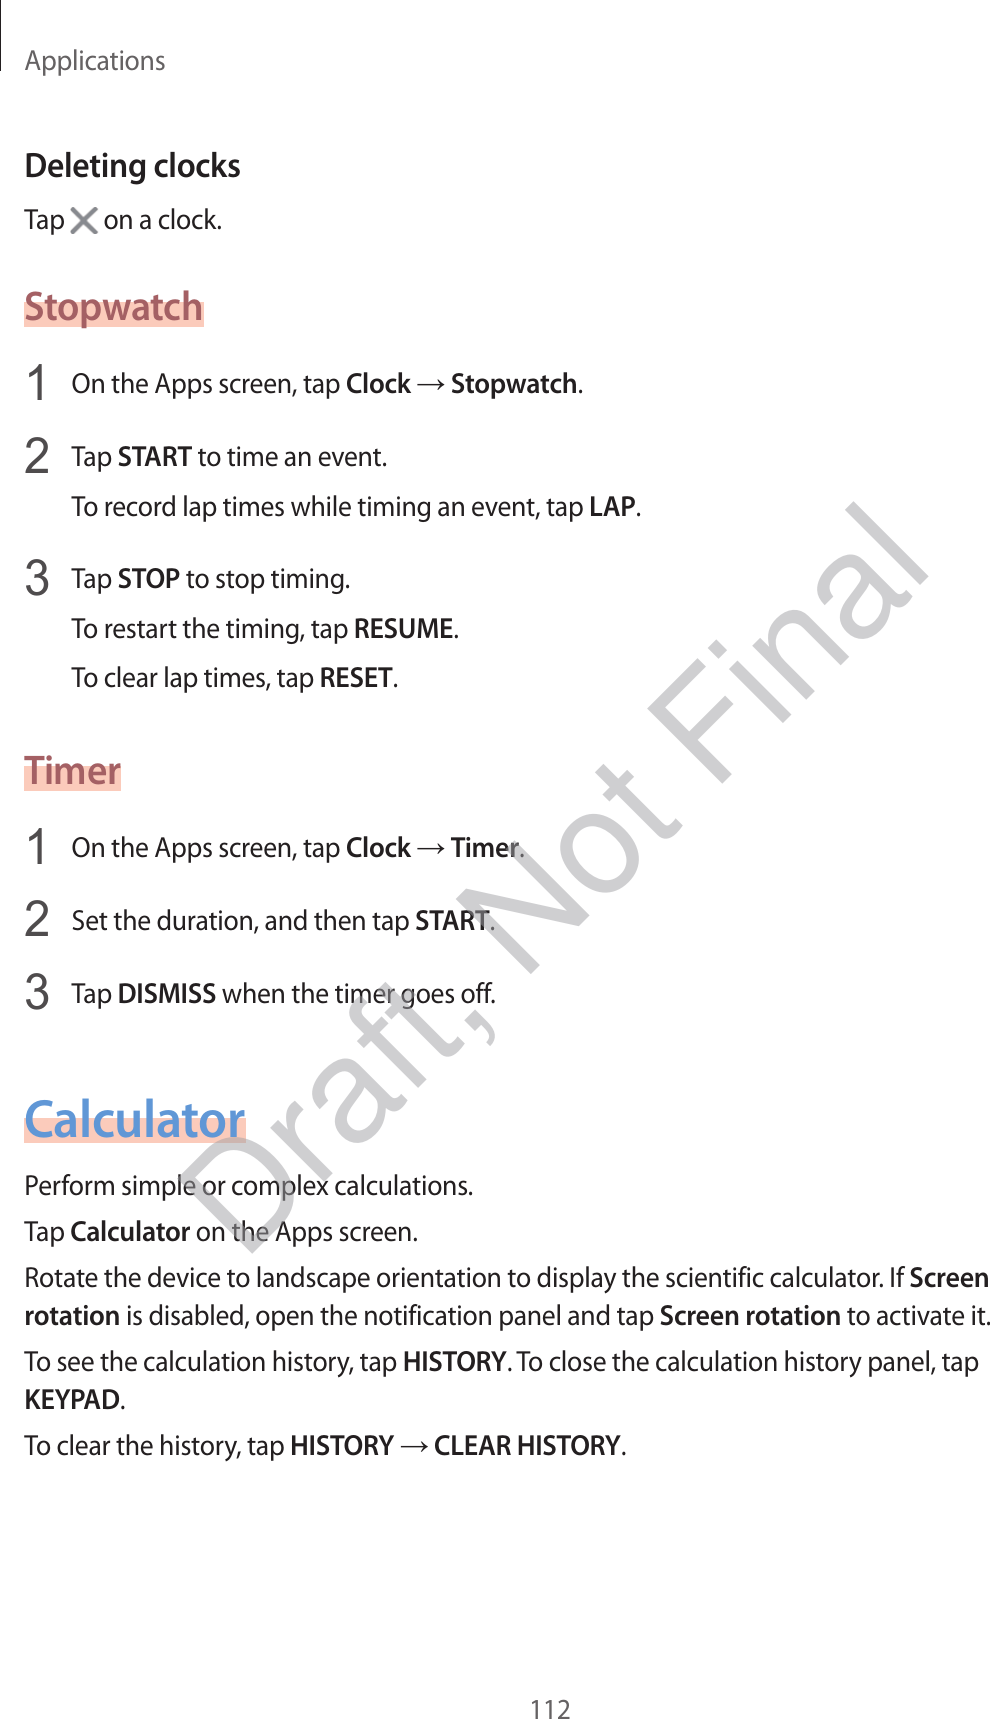 Applications112Deleting clocksTap   on a clock.Stopwatch1  On the Apps screen, tap Clock  Stopwatch.2  Tap START to time an event.To record lap times while timing an event, tap LAP.3  Tap STOP to stop timing.To restart the timing, tap RESUME.To clear lap times, tap RESET.Timer1  On the Apps screen, tap Clock  Timer.2  Set the duration, and then tap START.3  Tap DISMISS when the timer goes off.CalculatorPerform simple or complex calculations.Tap Calculator on the Apps screen.Rotate the device to landscape orientation to display the scientific calculator. If Screen rotation is disabled, open the notification panel and tap Screen rotation to activate it.To see the calculation history, tap HISTORY. To close the calculation history panel, tap KEYPAD.To clear the history, tap HISTORY  CLEAR HISTORY.Draft, Not Final